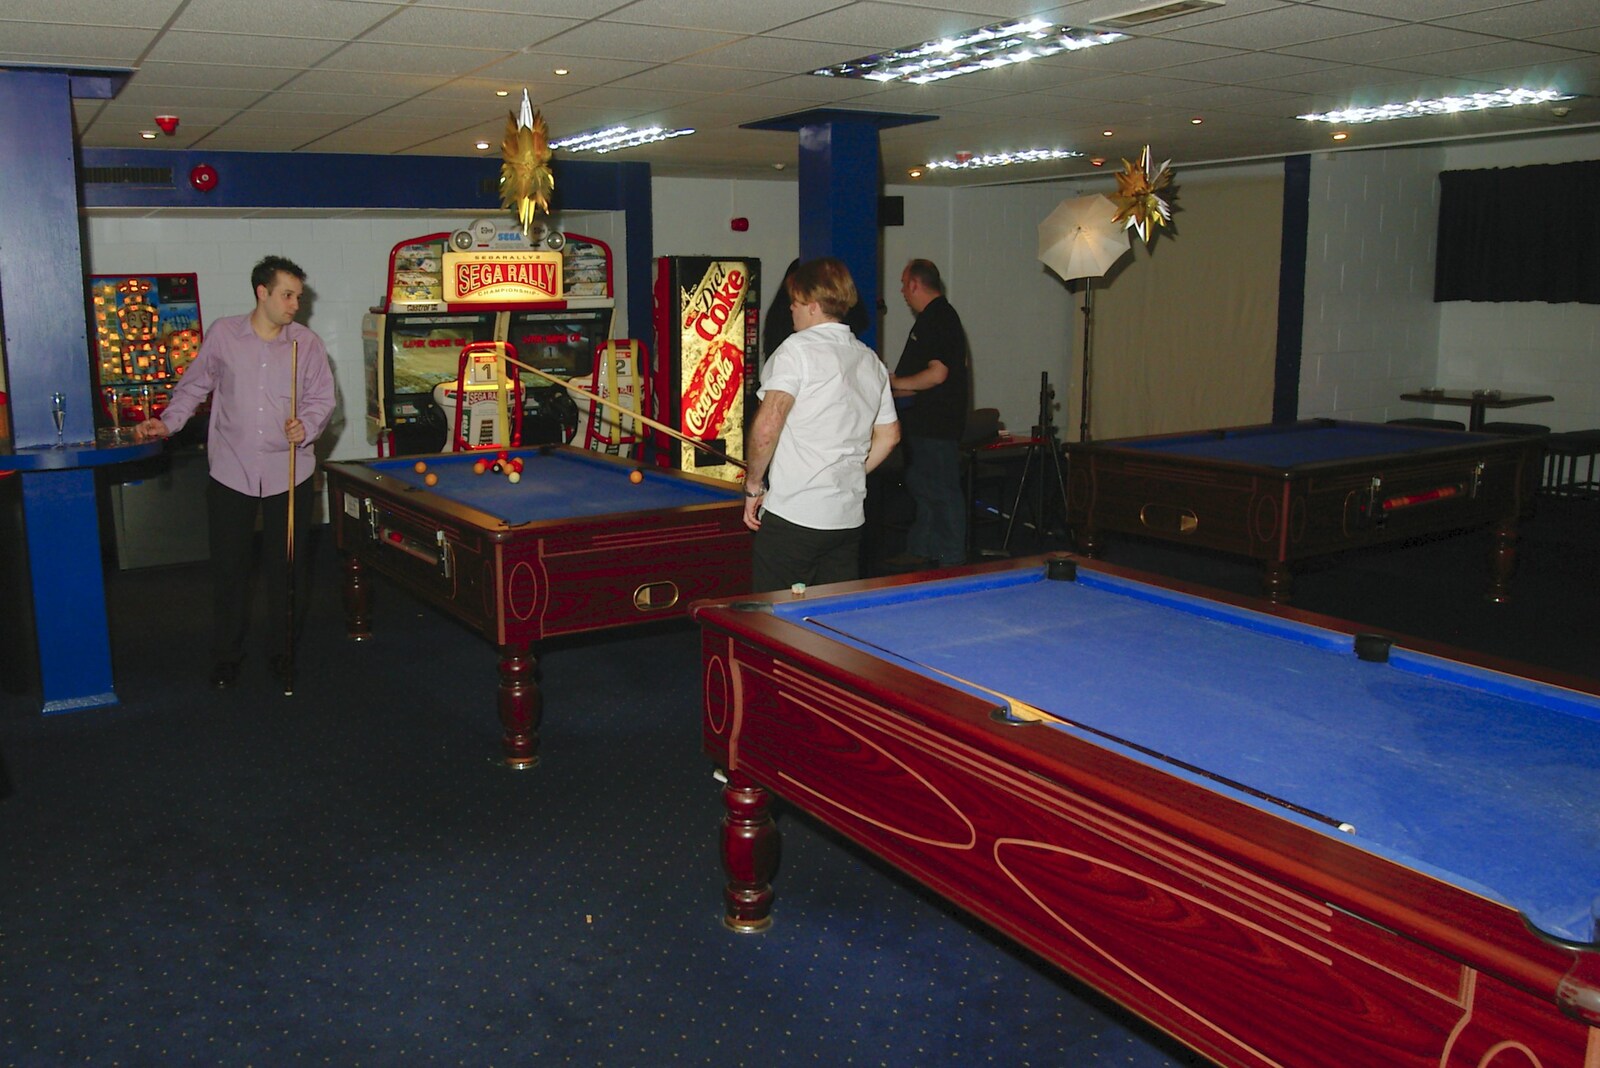 Stick-game action in the games room from Uni: A Polytechnic Reunion, Plymouth, Devon - 17th December 2005